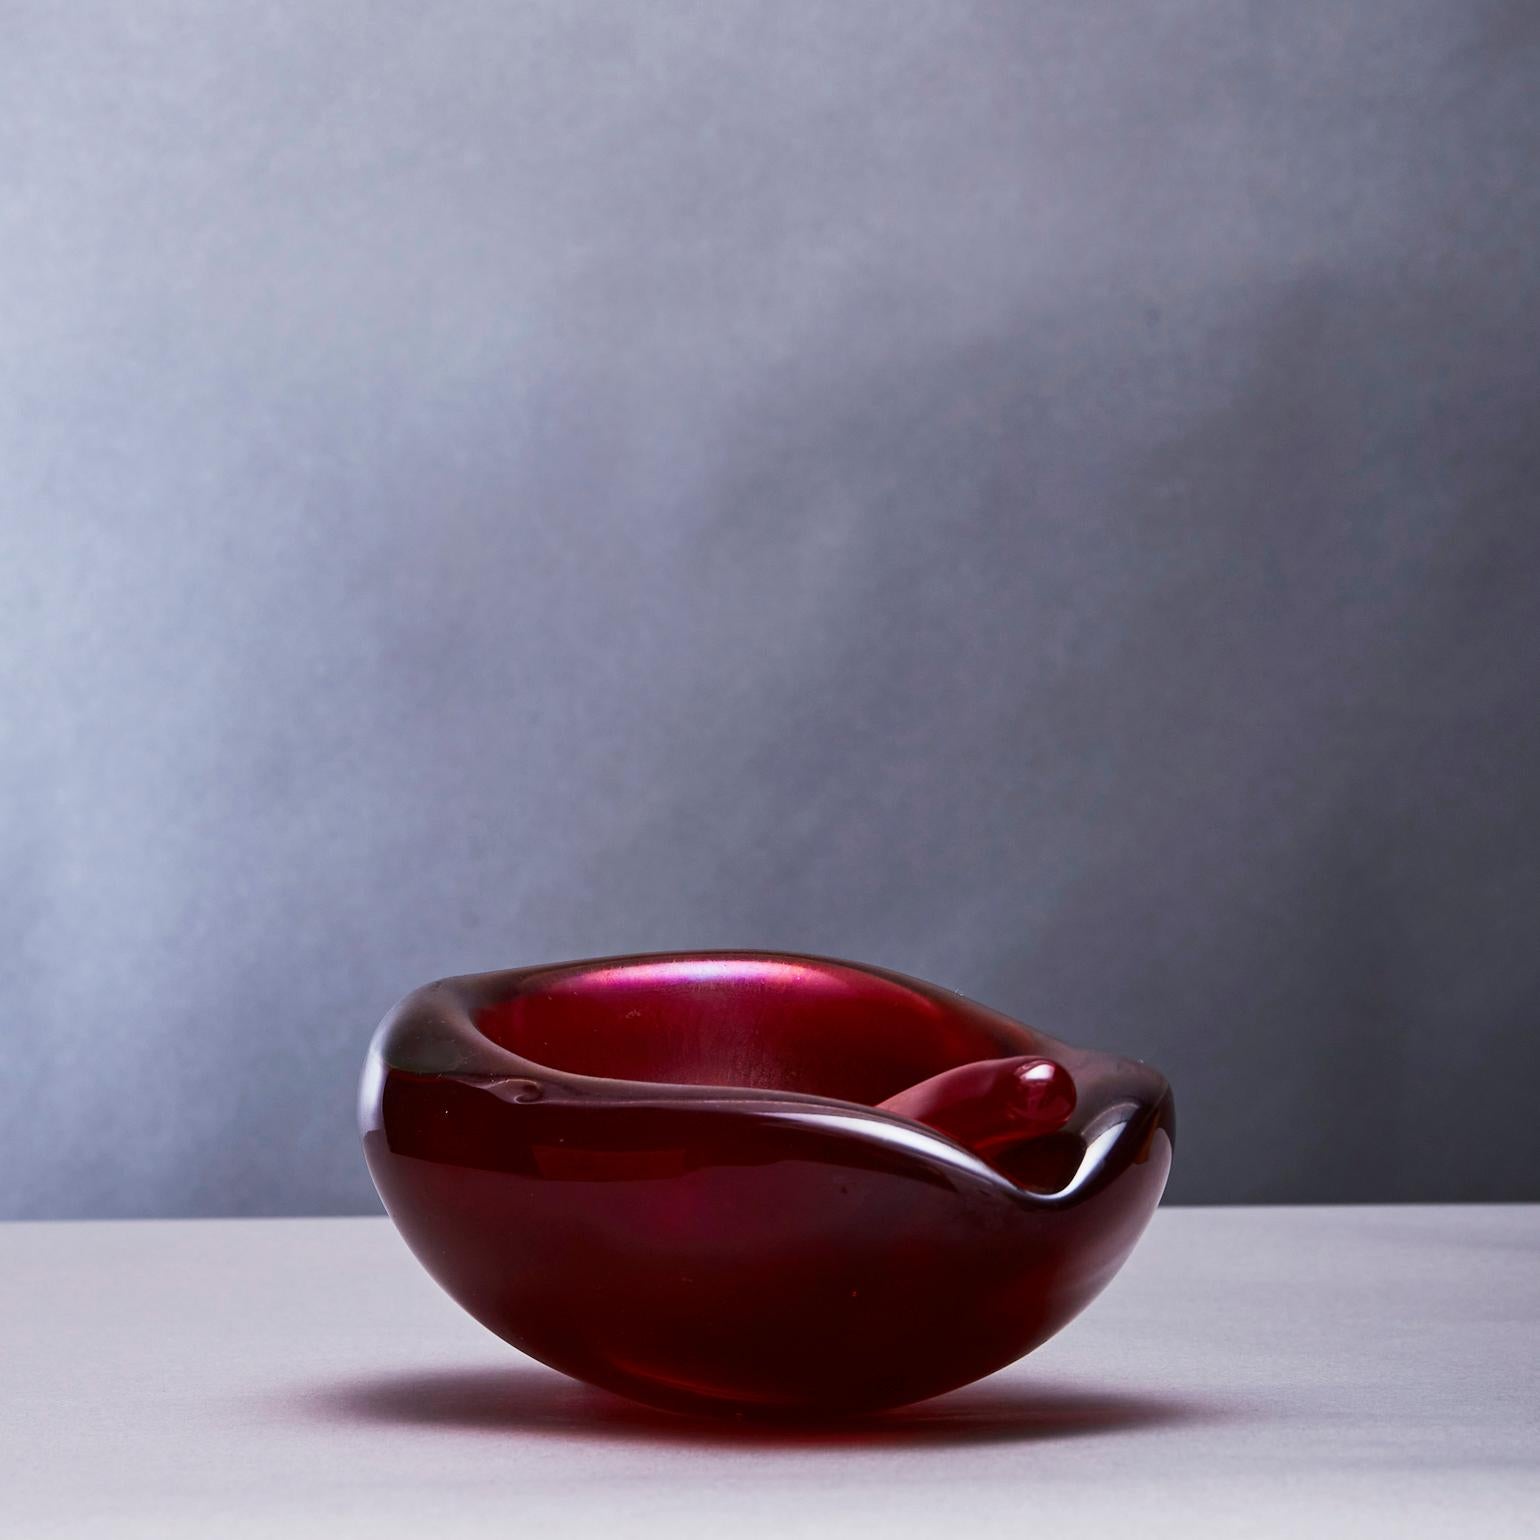 Rare deep red cased and iridized glass, bowl complete with stubber (cendrier / ashtray), designed by Carlo Scarpa (1906-1978) circa 1942, for Venini, with acid stamp on its underside 'Venini Murano MADE IN ITALY'
From 1933 to 1947 Scarpa became the